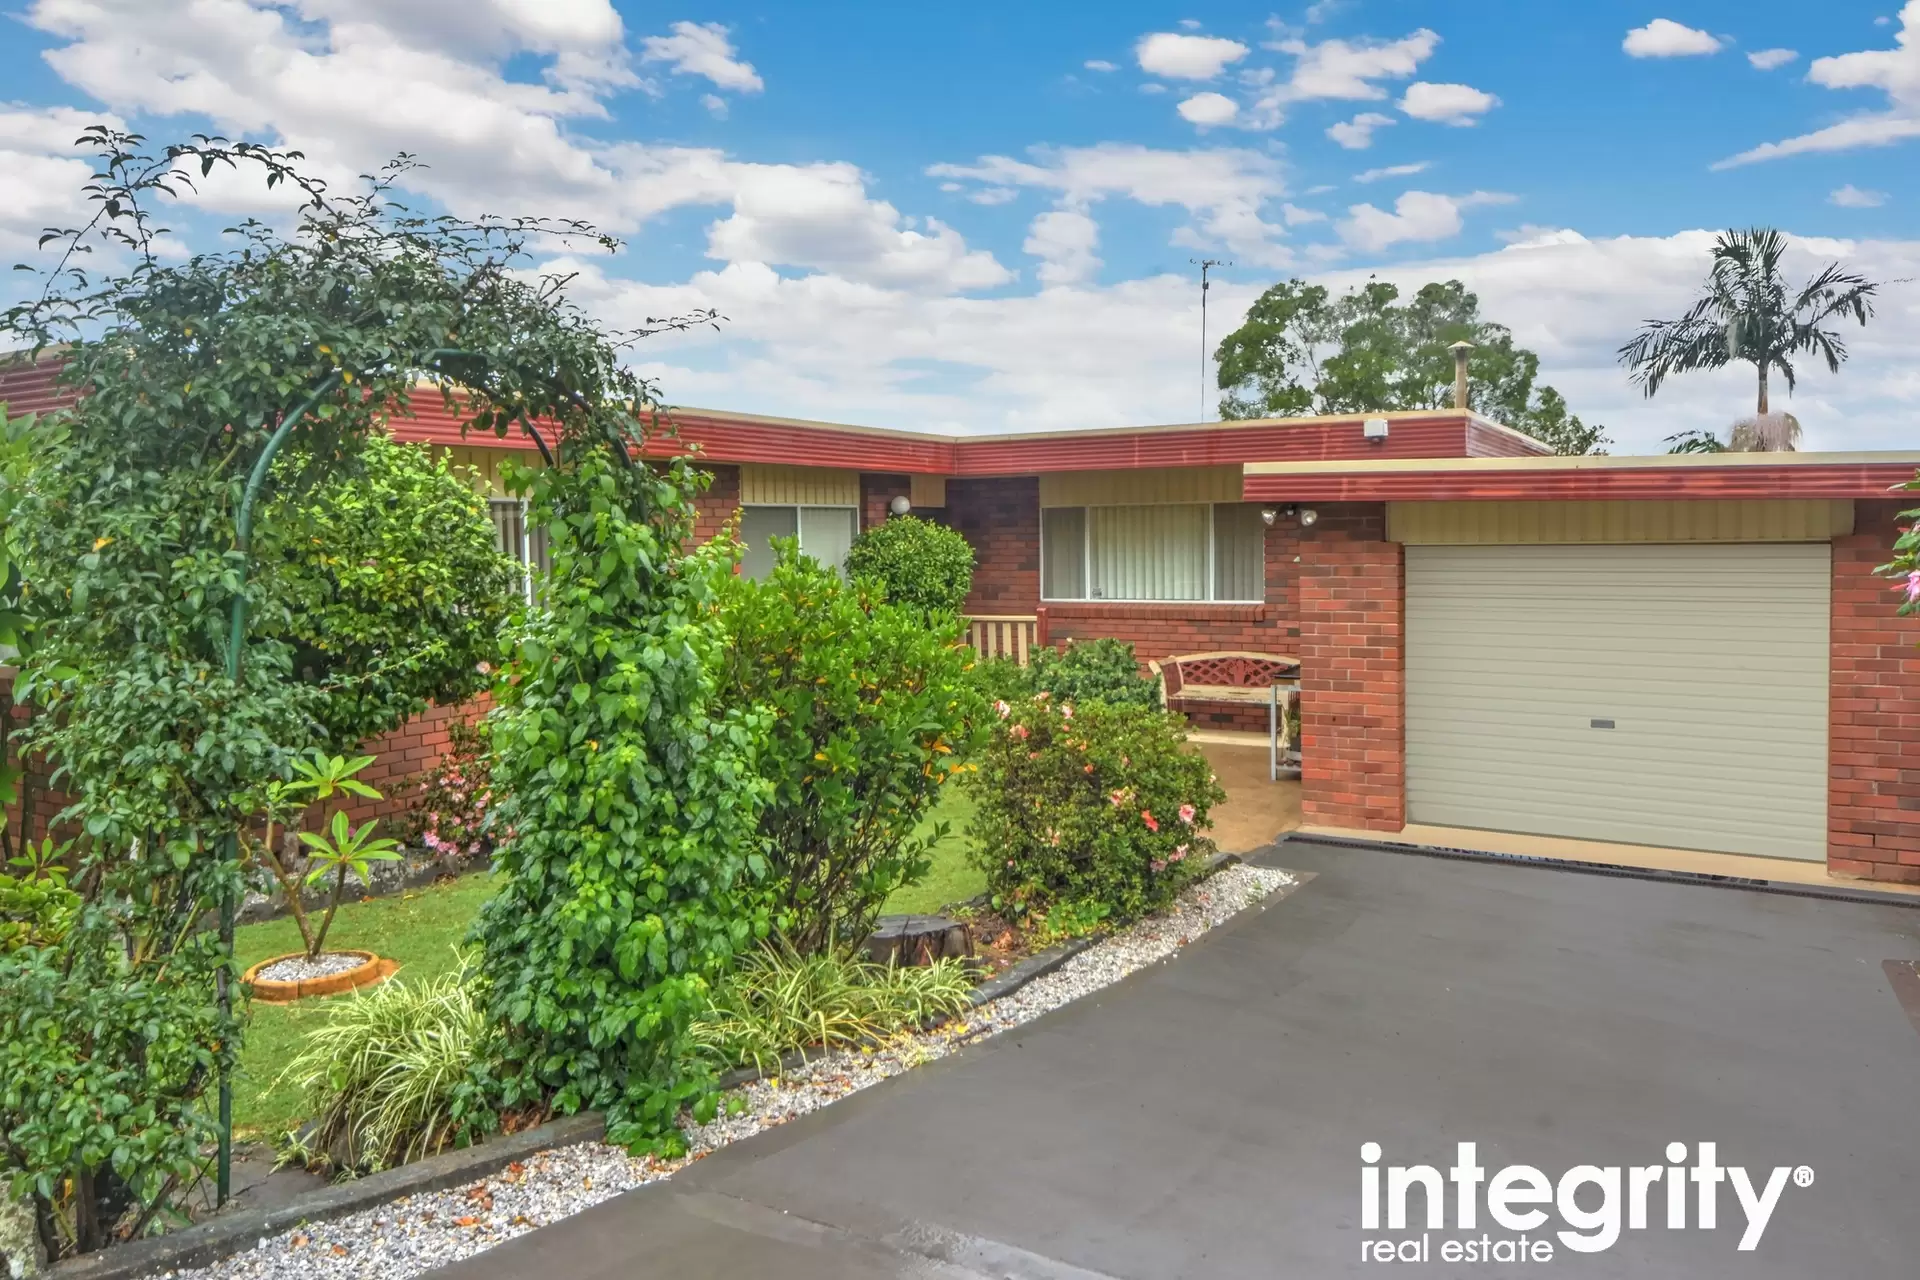 76 West Birriley Street, Bomaderry Sold by Integrity Real Estate - image 1